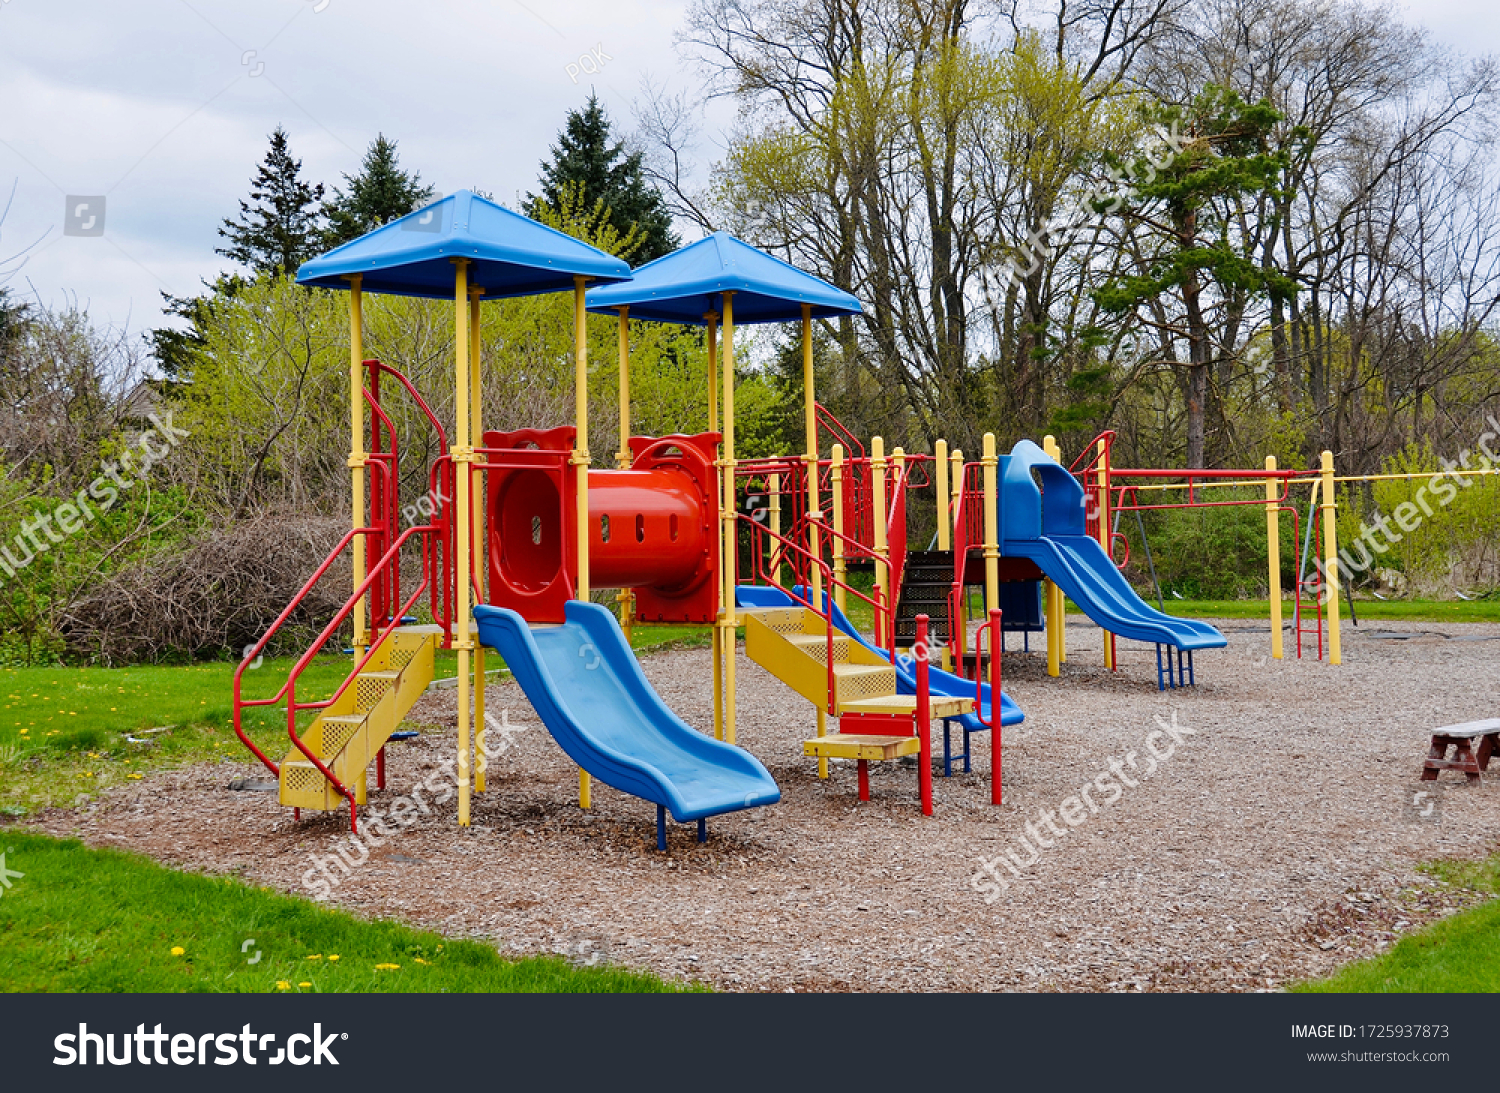 Children playground, while nobody due to  Covid- 19 pandemic currently (early May 2020) in New York State. #1725937873